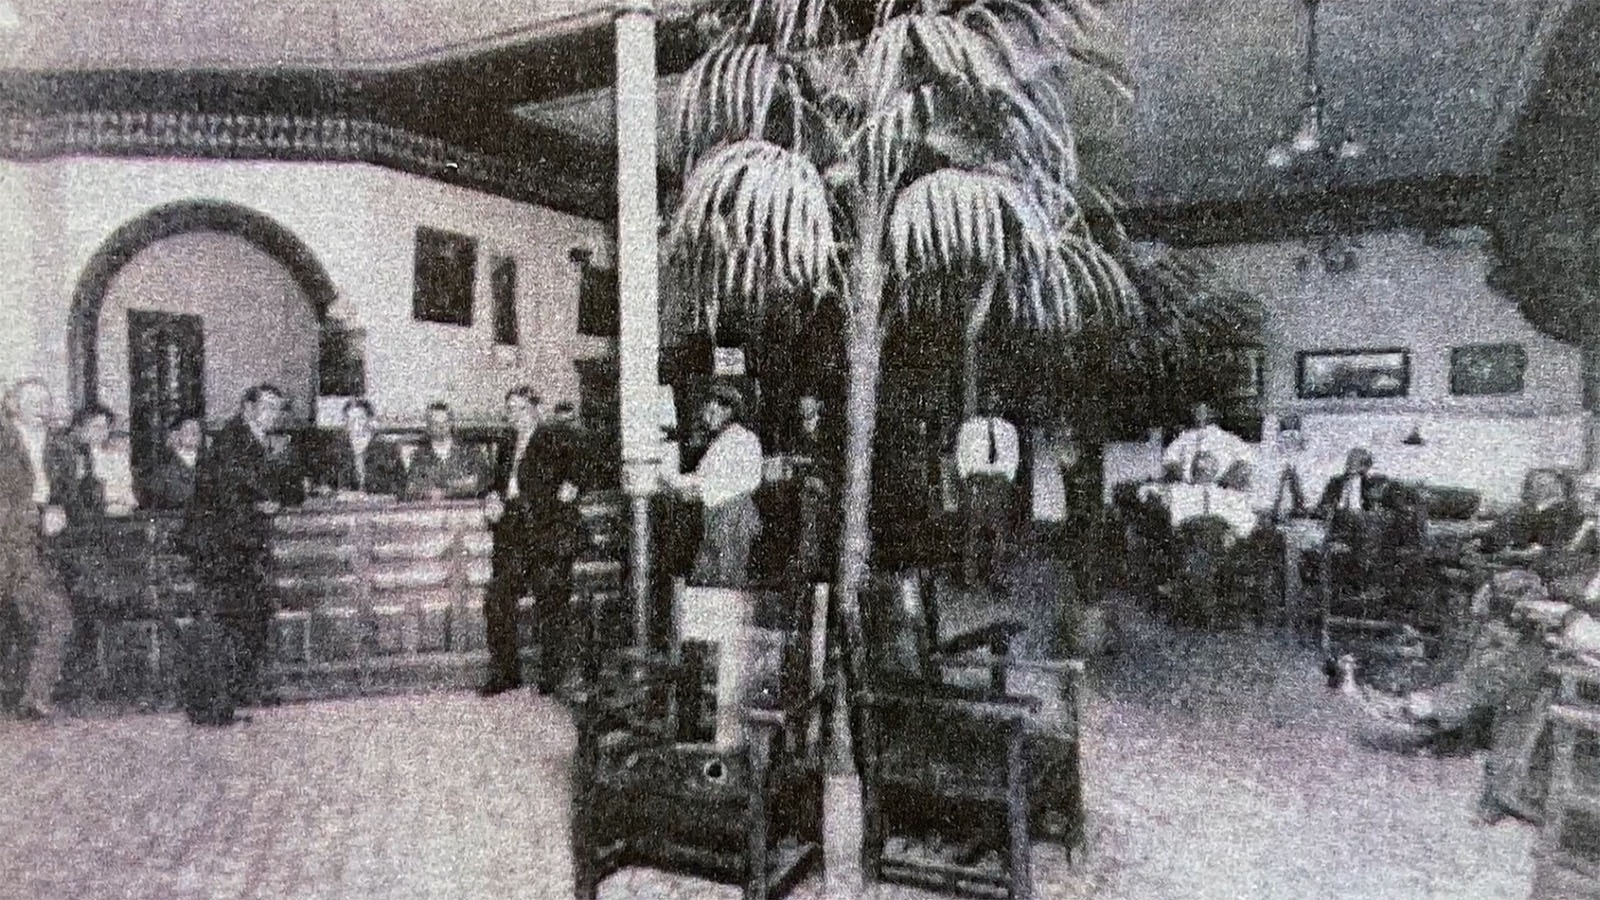 The lobby of the Emery Hotel circa 1910, complete with tropical plants.